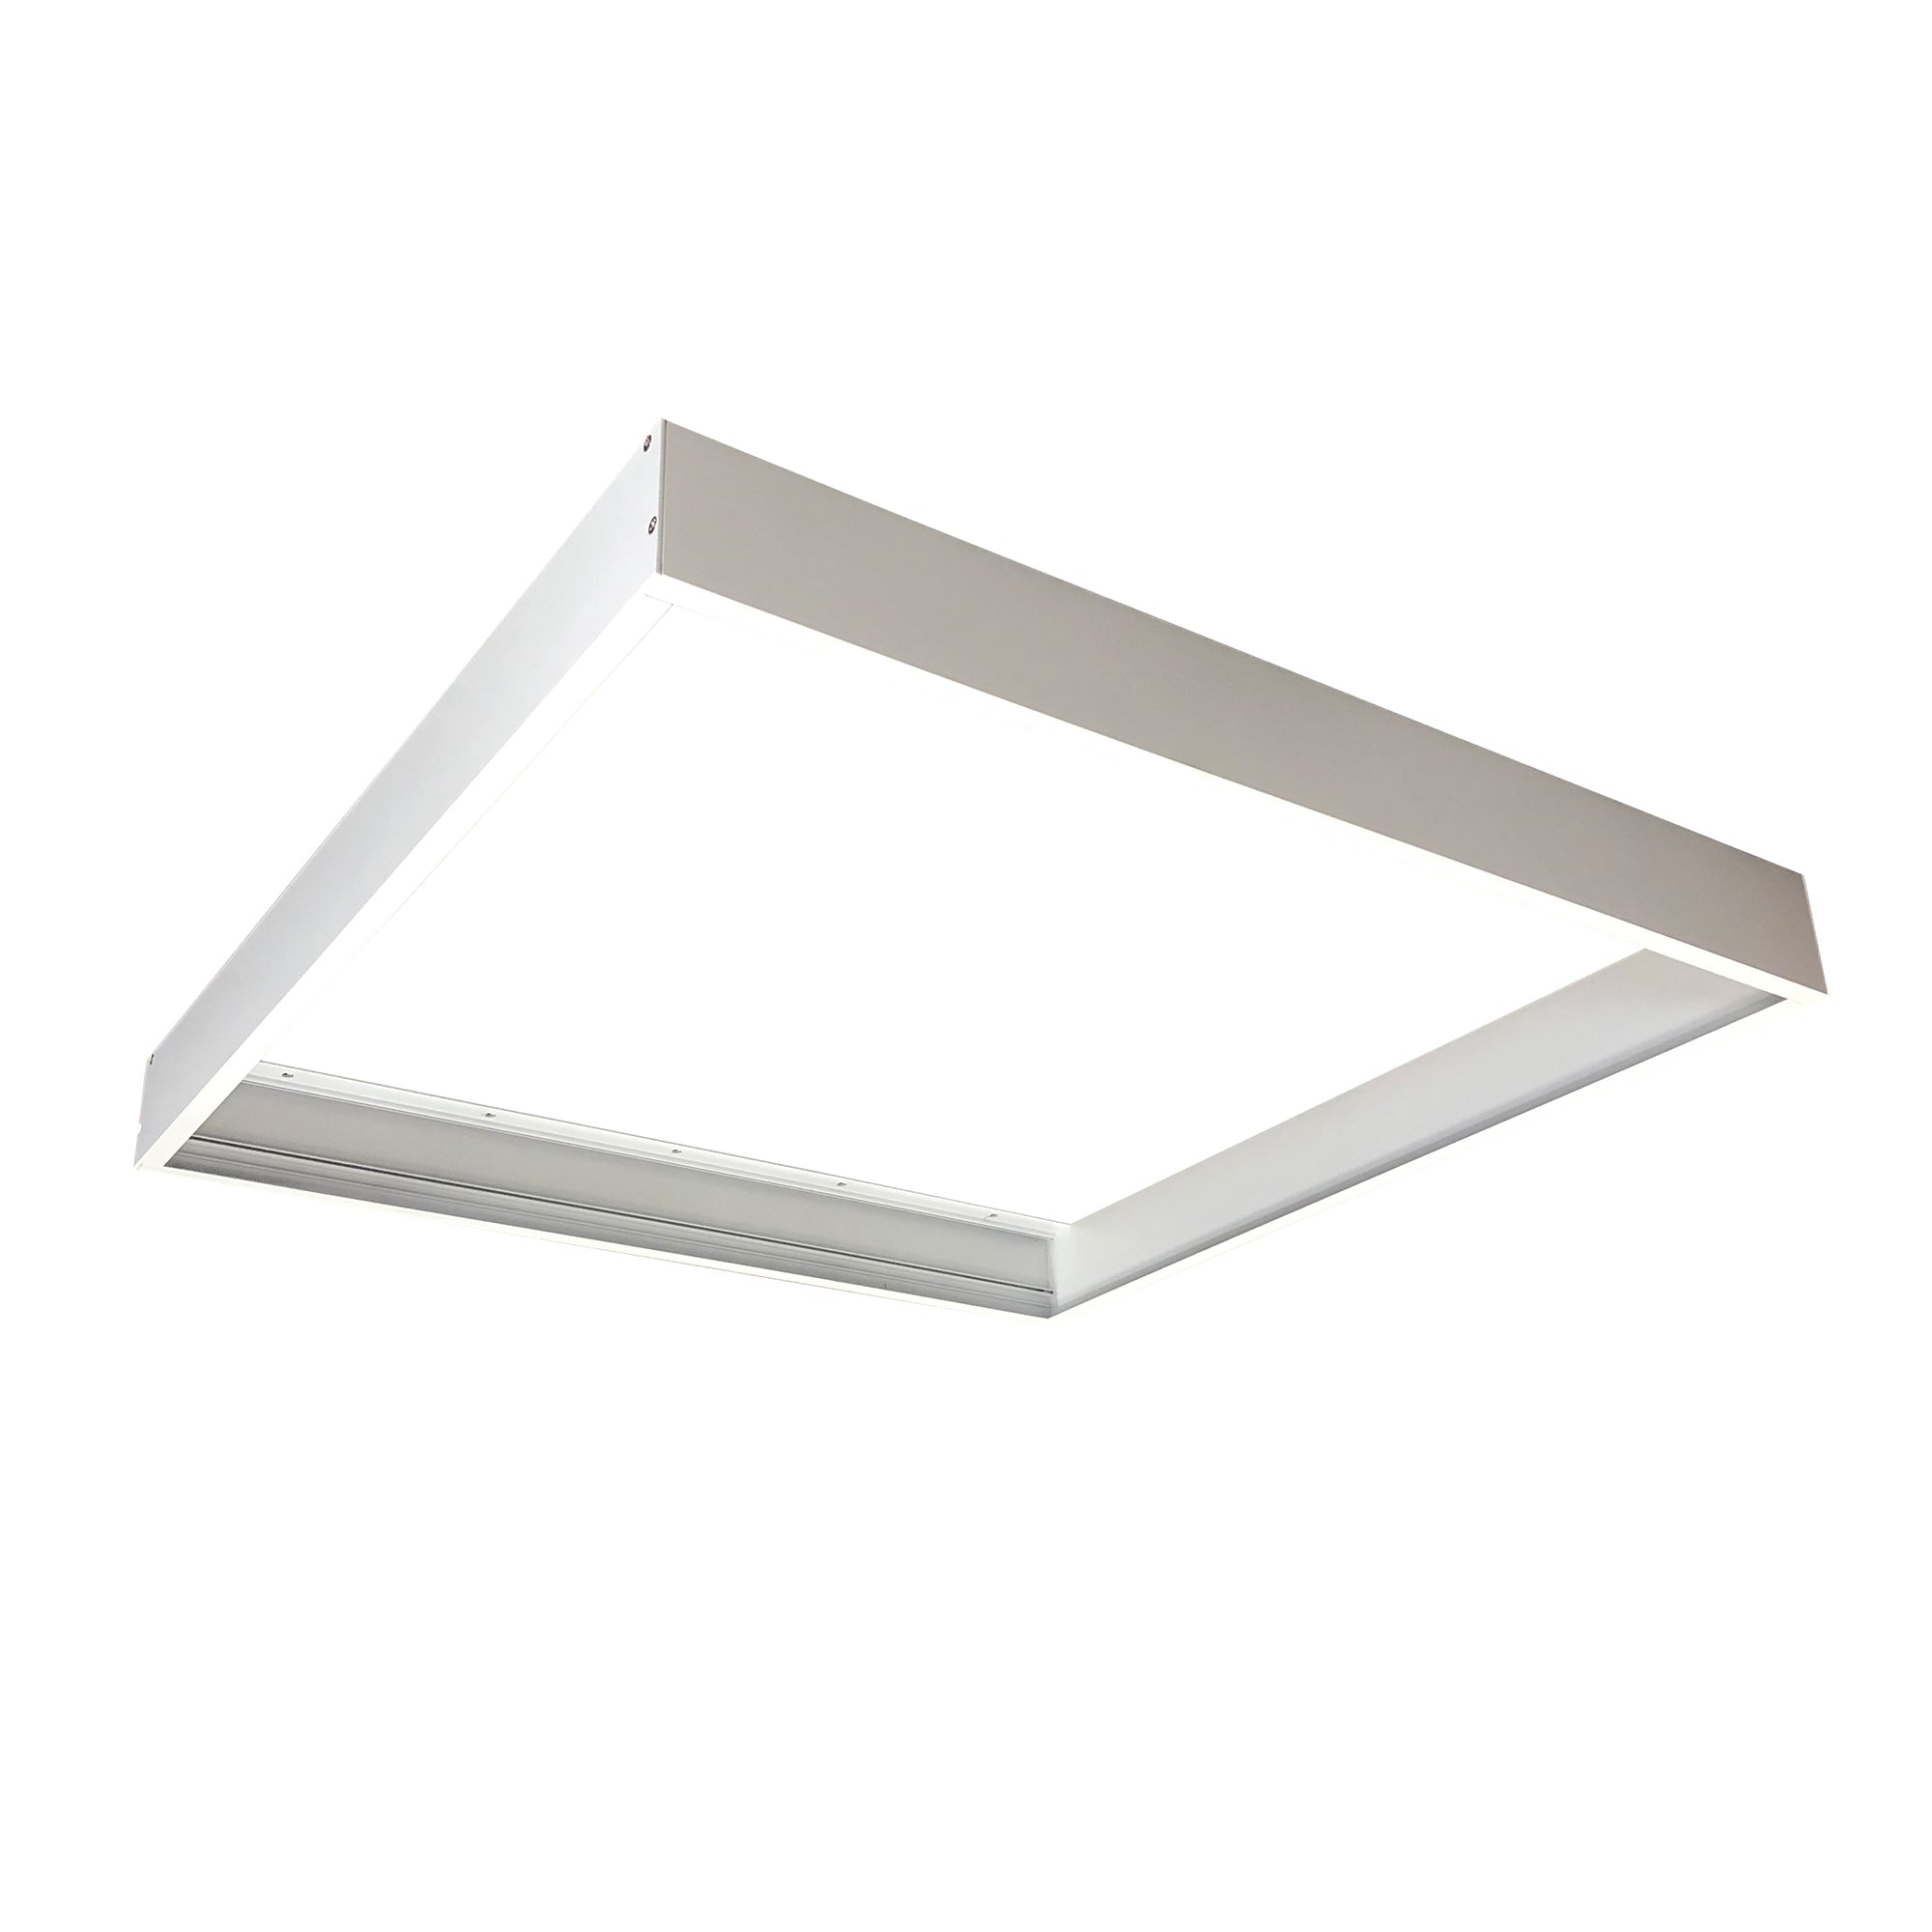 Nora Lighting NPDBL-22DFK/W - Recessed - Surface Mounting Frame for 2'x2' LED Backlit Panels